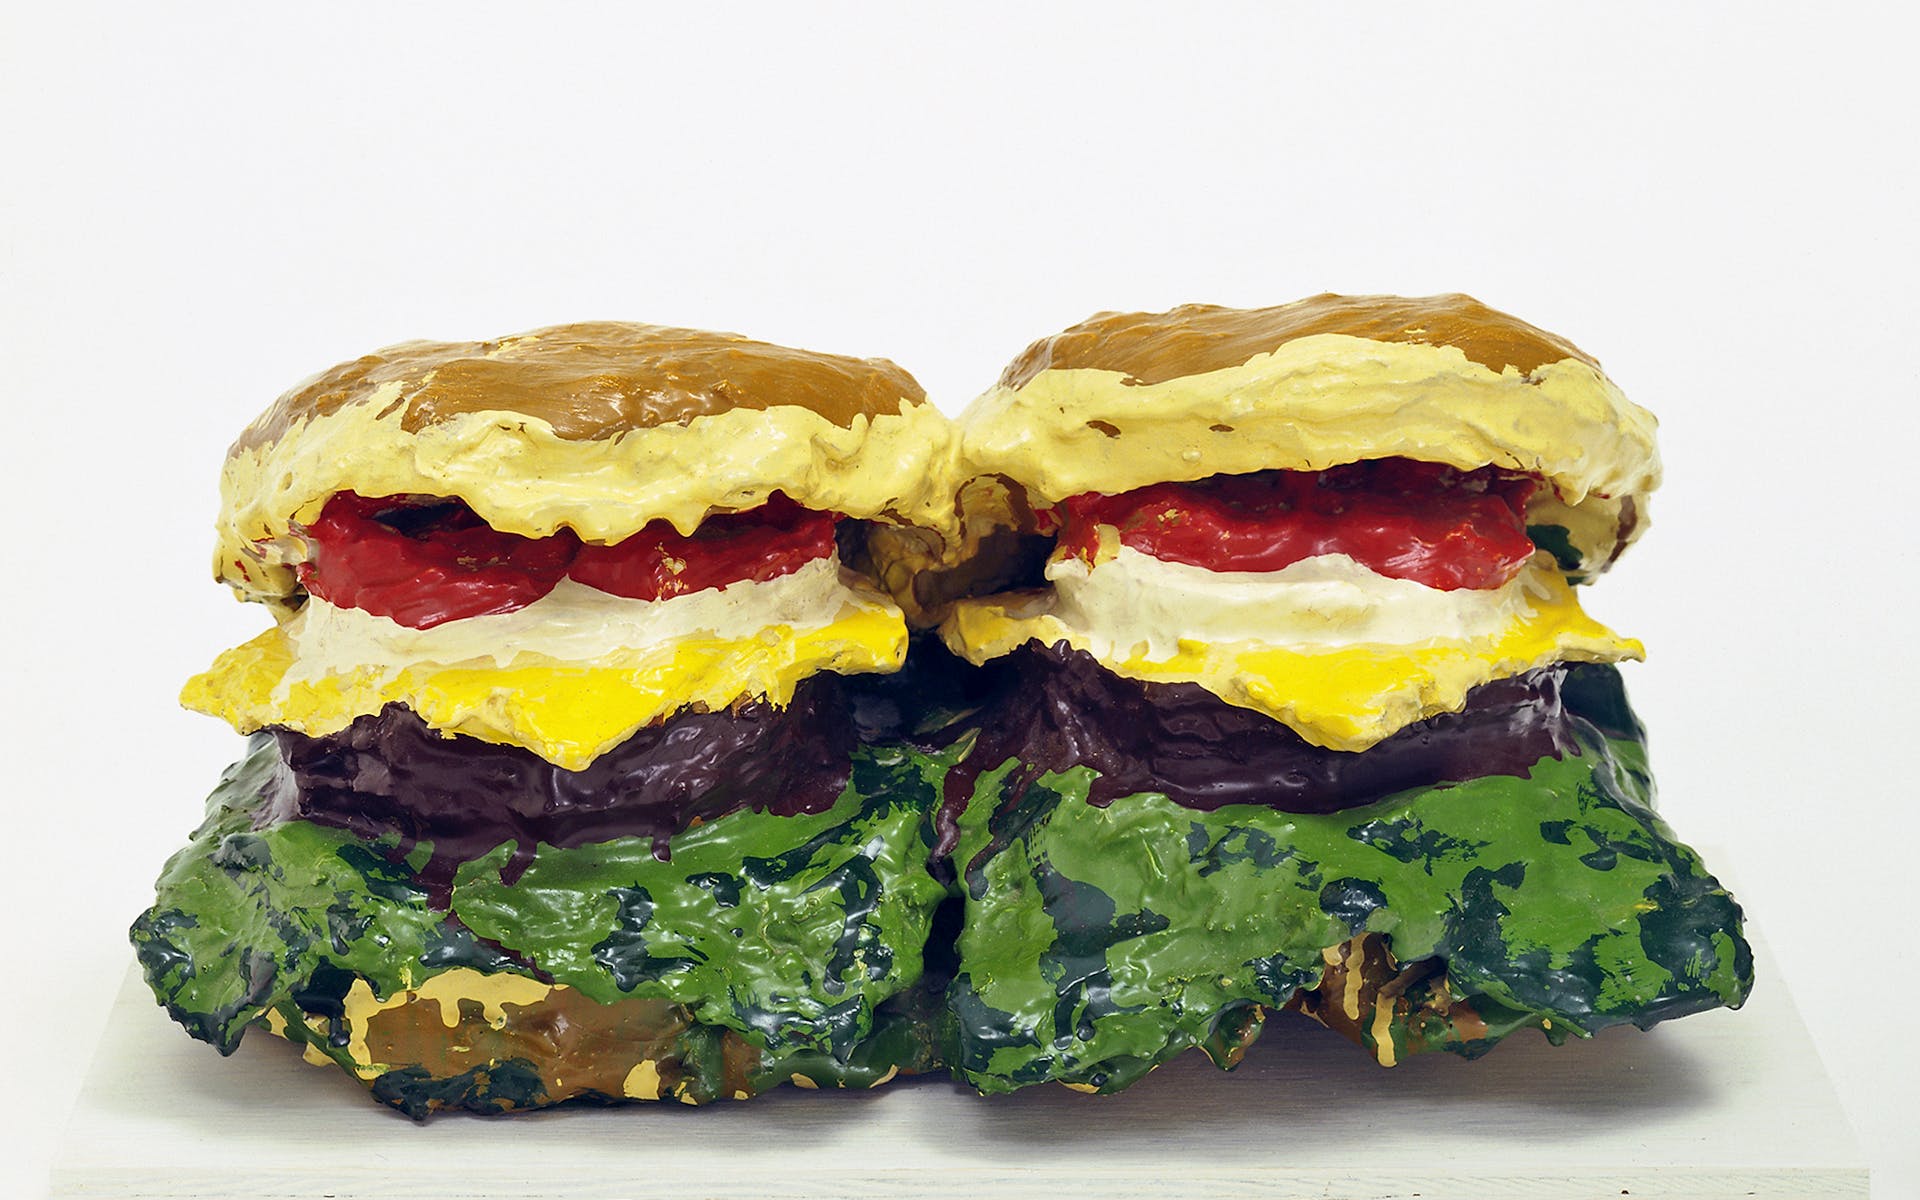 Claes Oldenburg, Two Cheeseburgers, with Everything (Dual Hamburgers), 1962